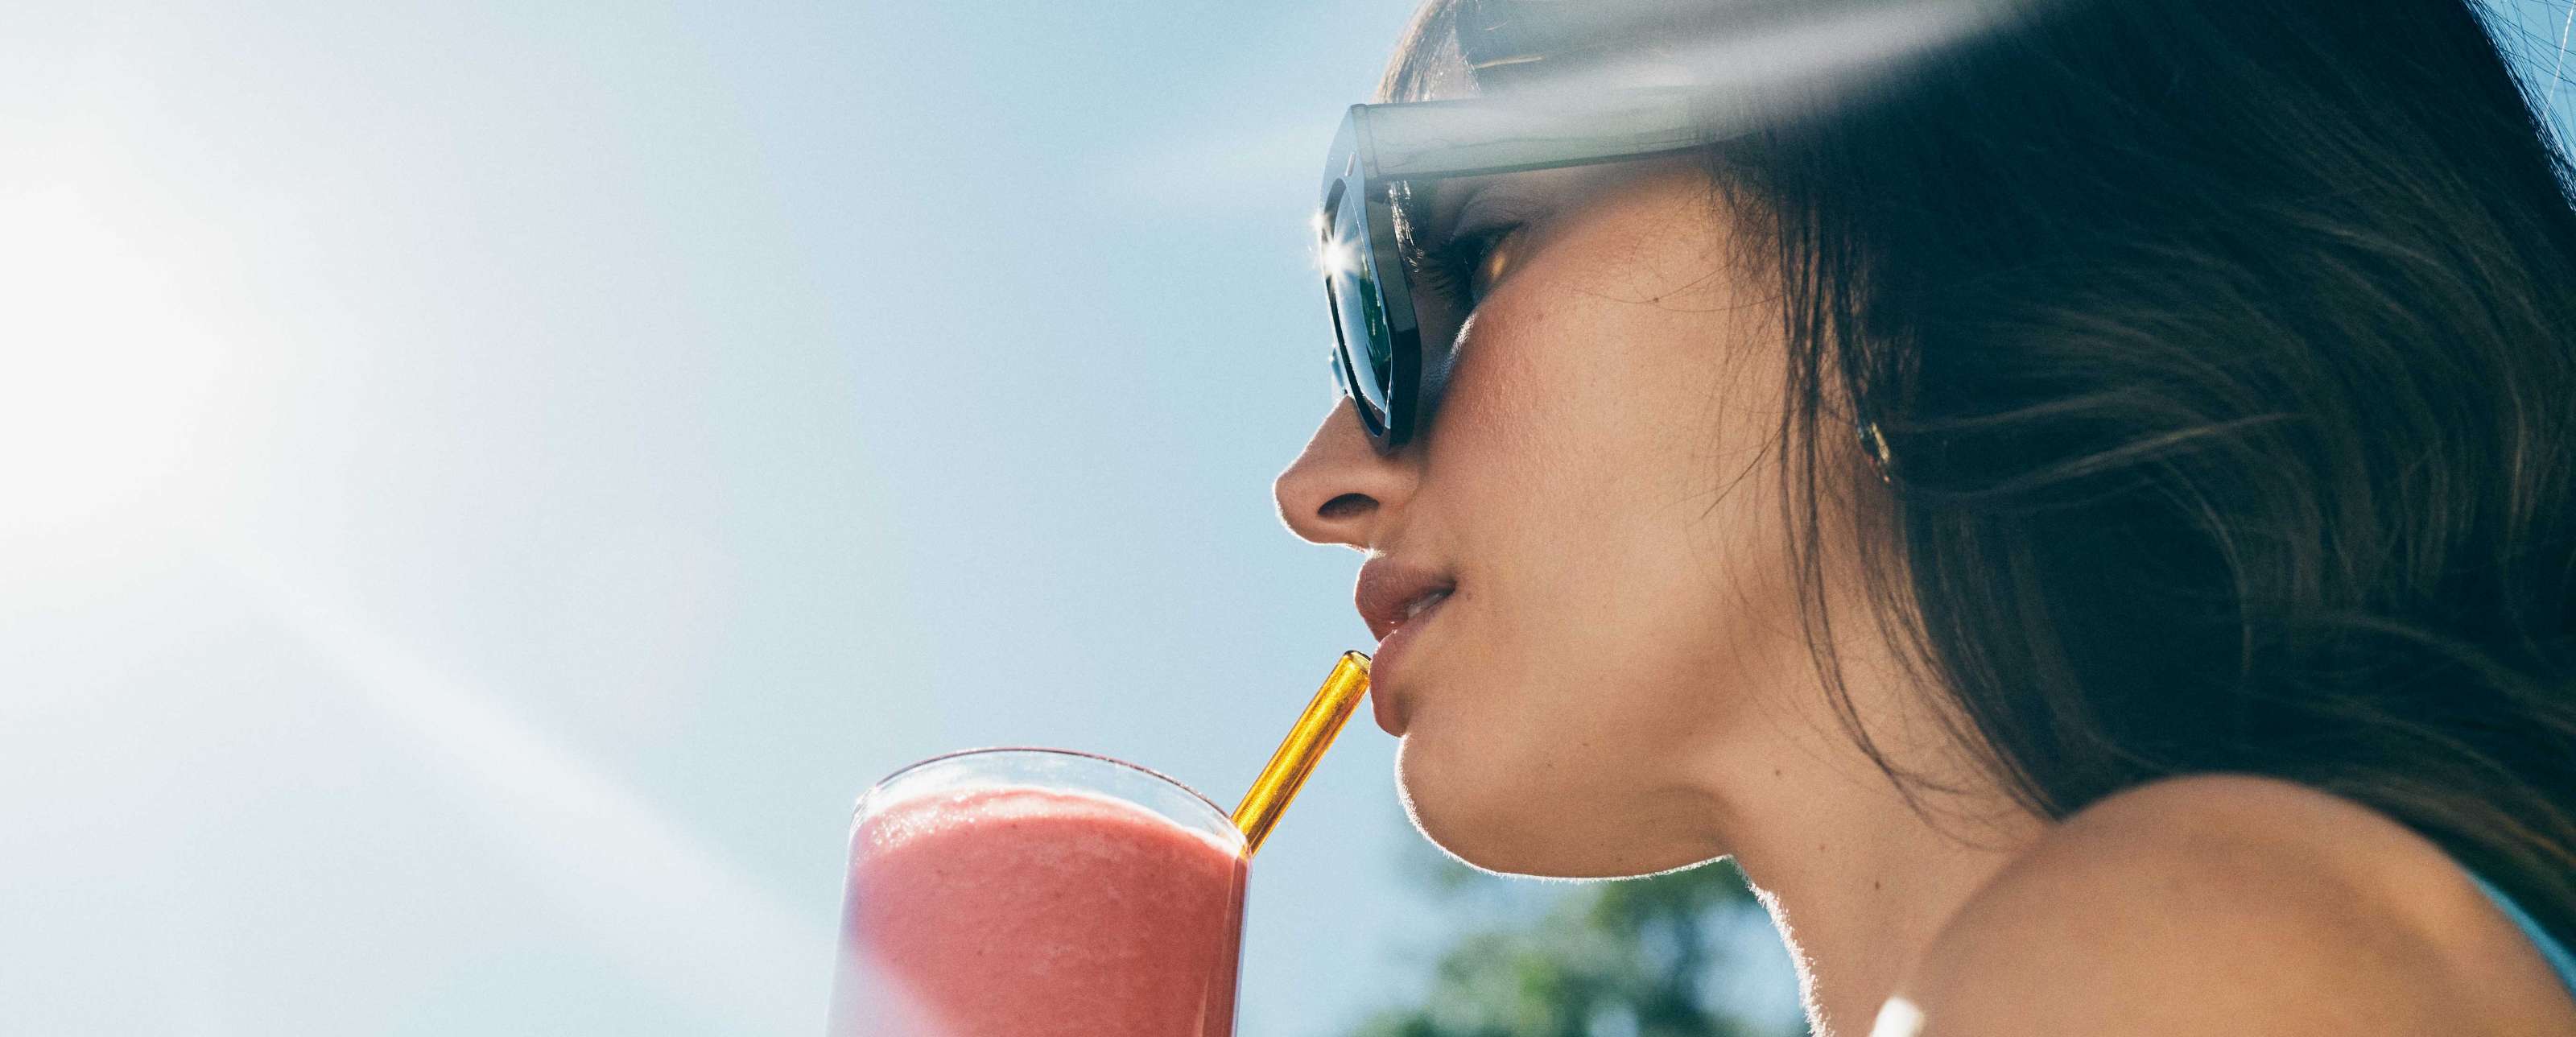 a woman sips on a smoothie in the bight sunshine